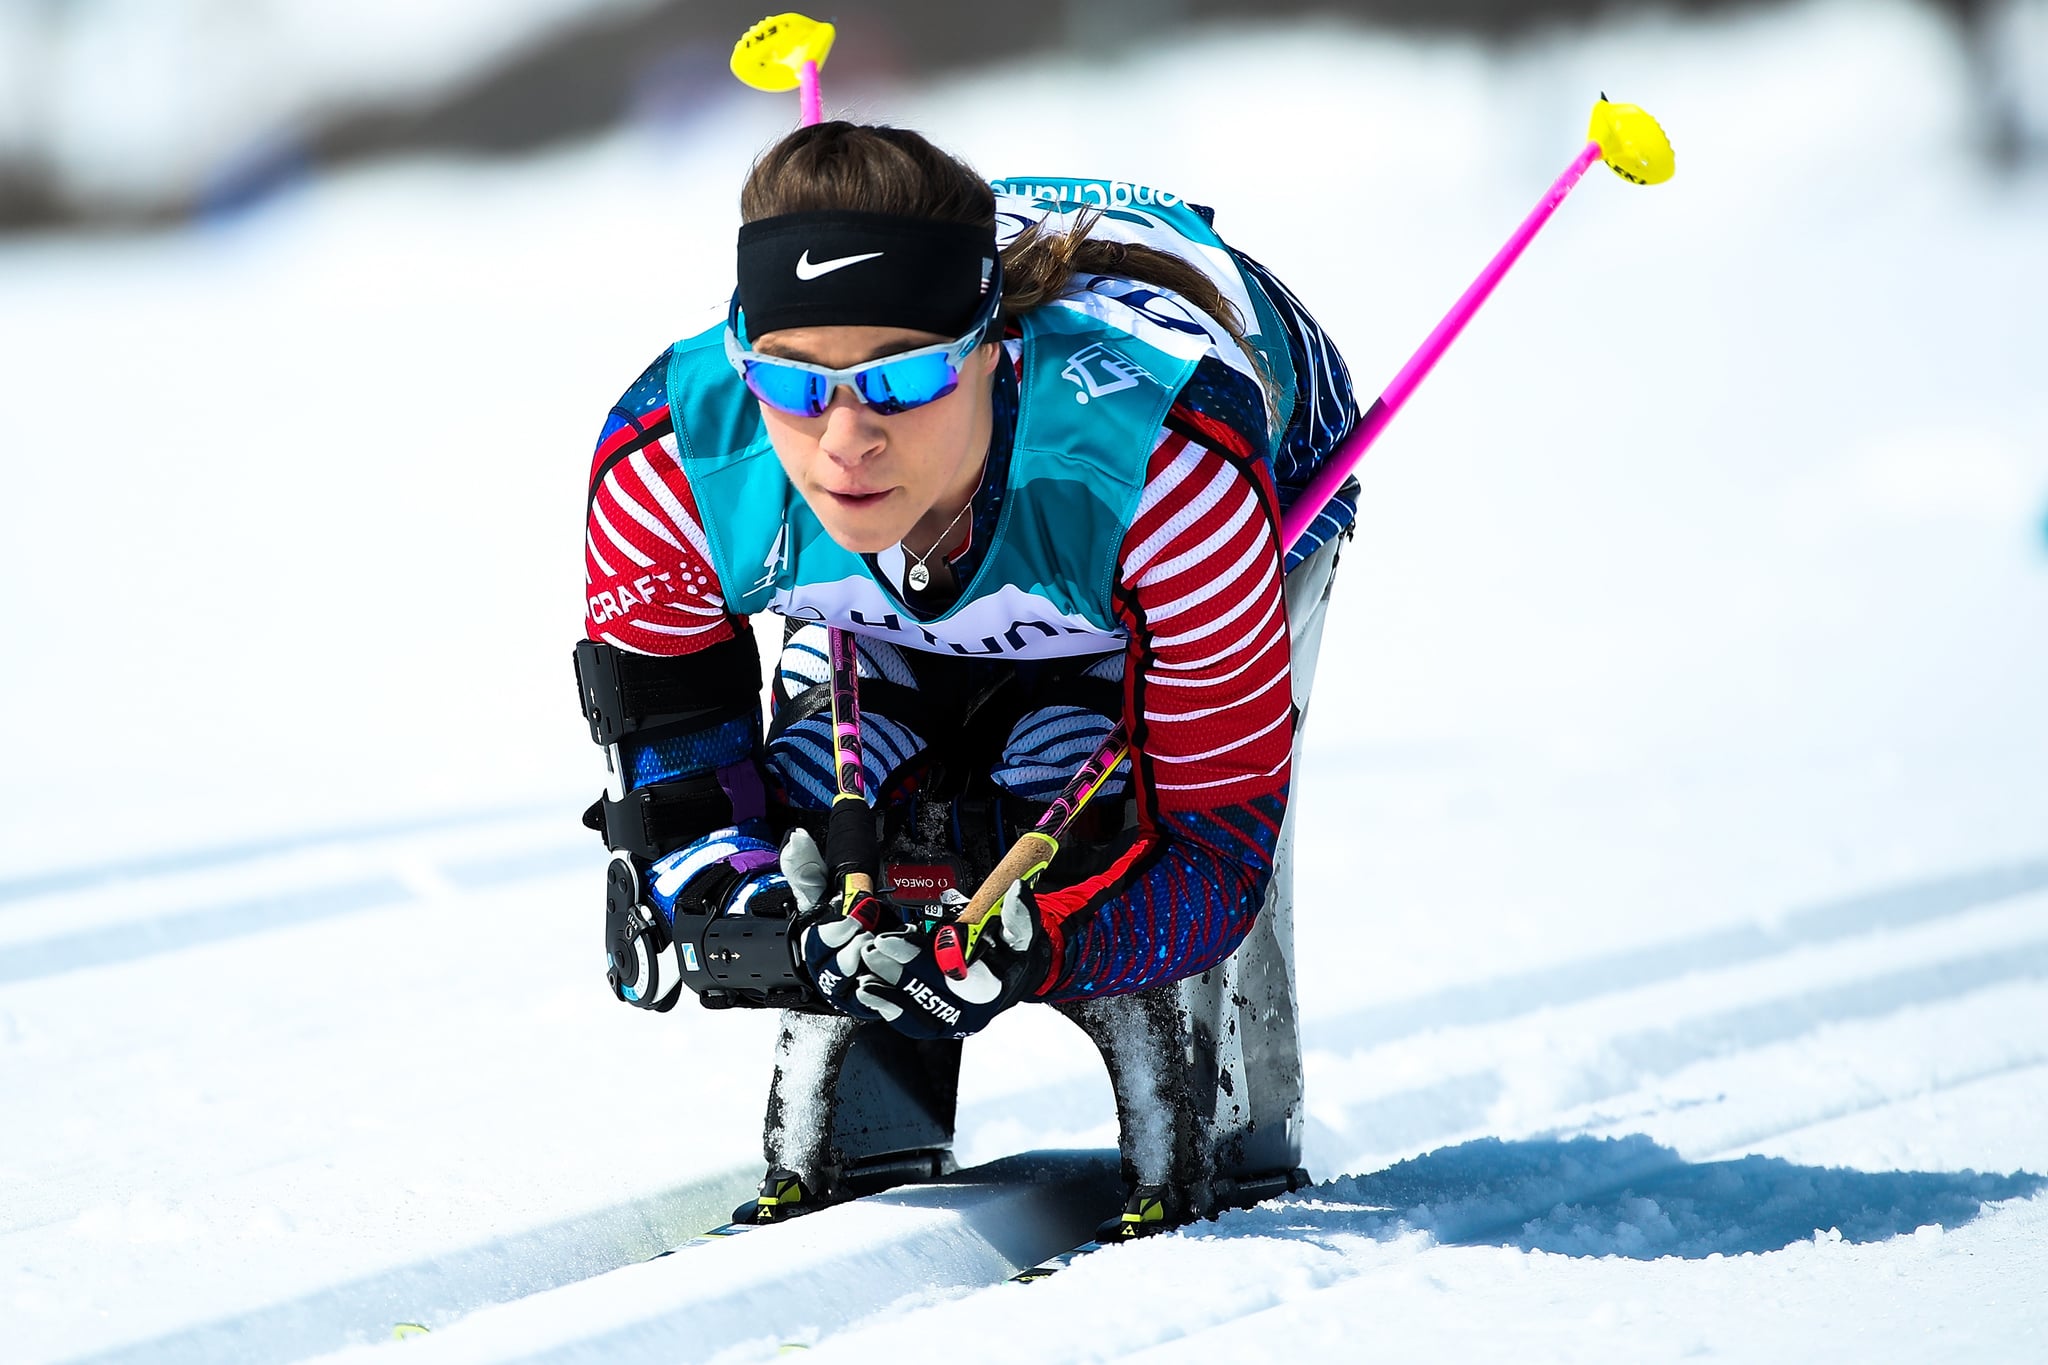 PYEONGCHANG-GUN, SOUTH KOREA - MARCH 11:  Oksana Masters of the United States competes in the Women's Cross Country 12km - Sitting event at Alpensia Biathlon Centre during day two of the PyeongChang 2018 Paralympic Games on March 11, 2018 in Pyeongchang-gun, South Korea.  (Photo by Lintao Zhang/Getty Images)